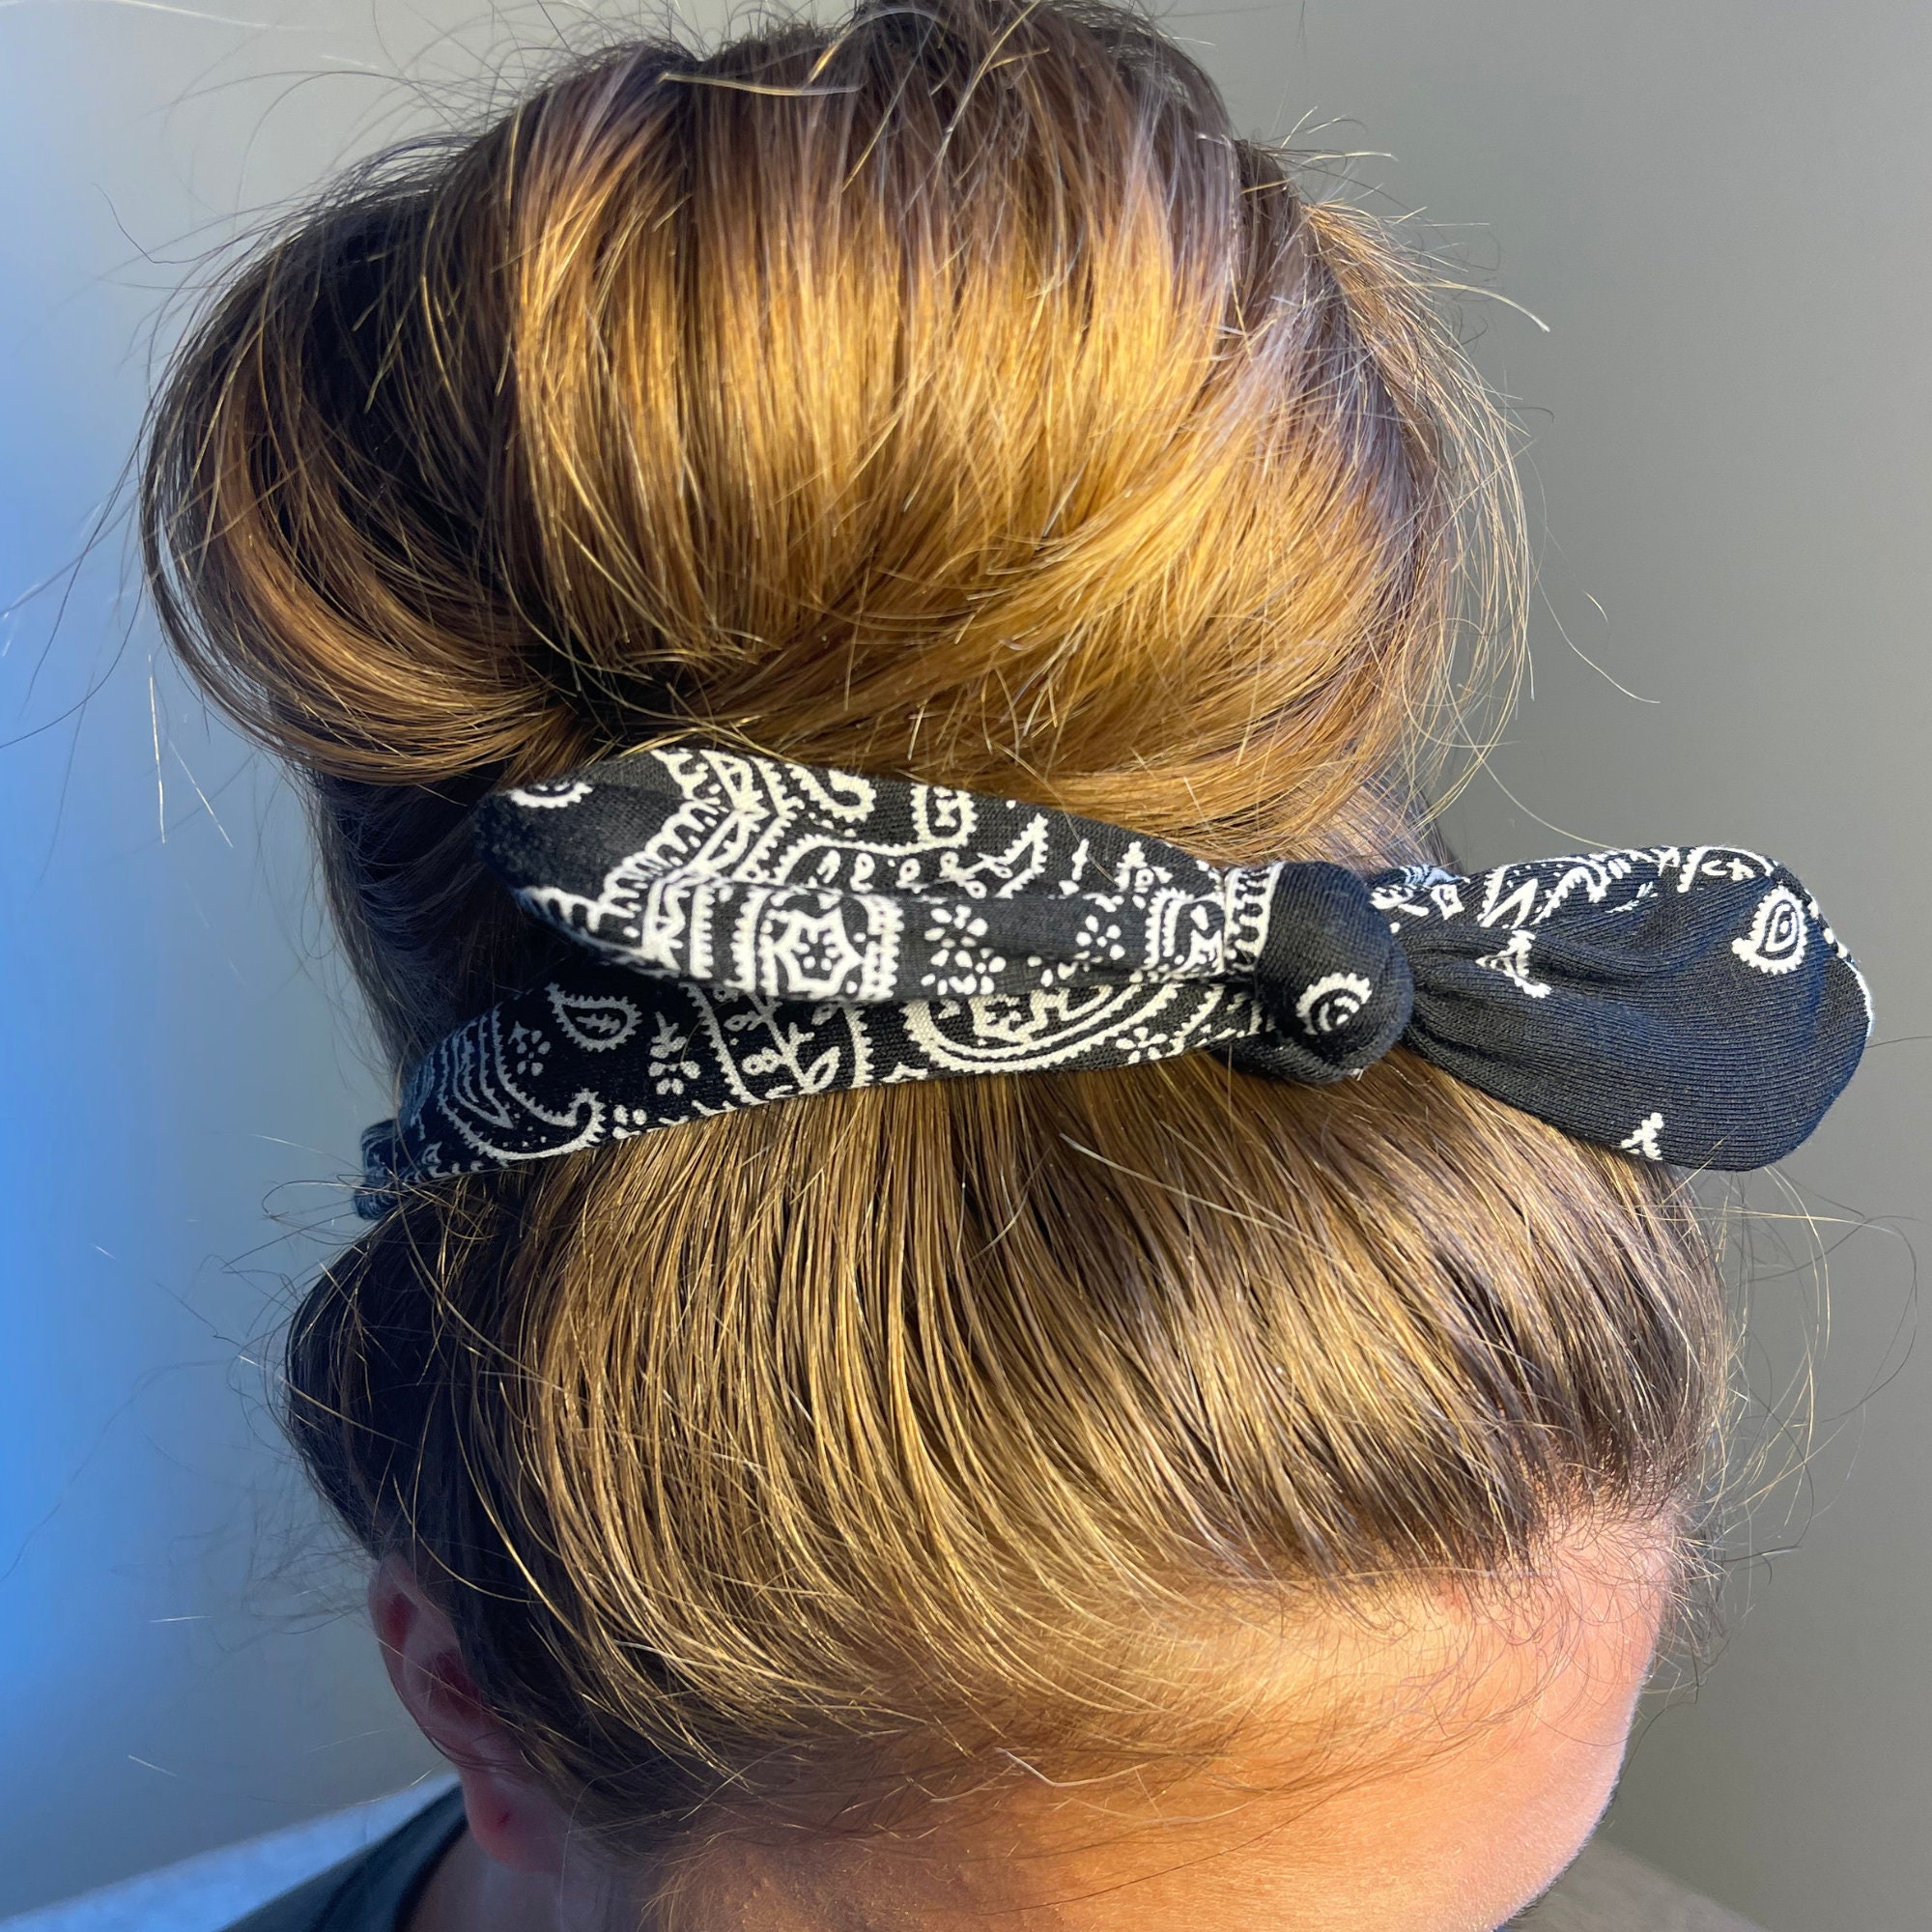 5 ways to wear a scarf and top knot - 1 - Twist tie - Hair Romance